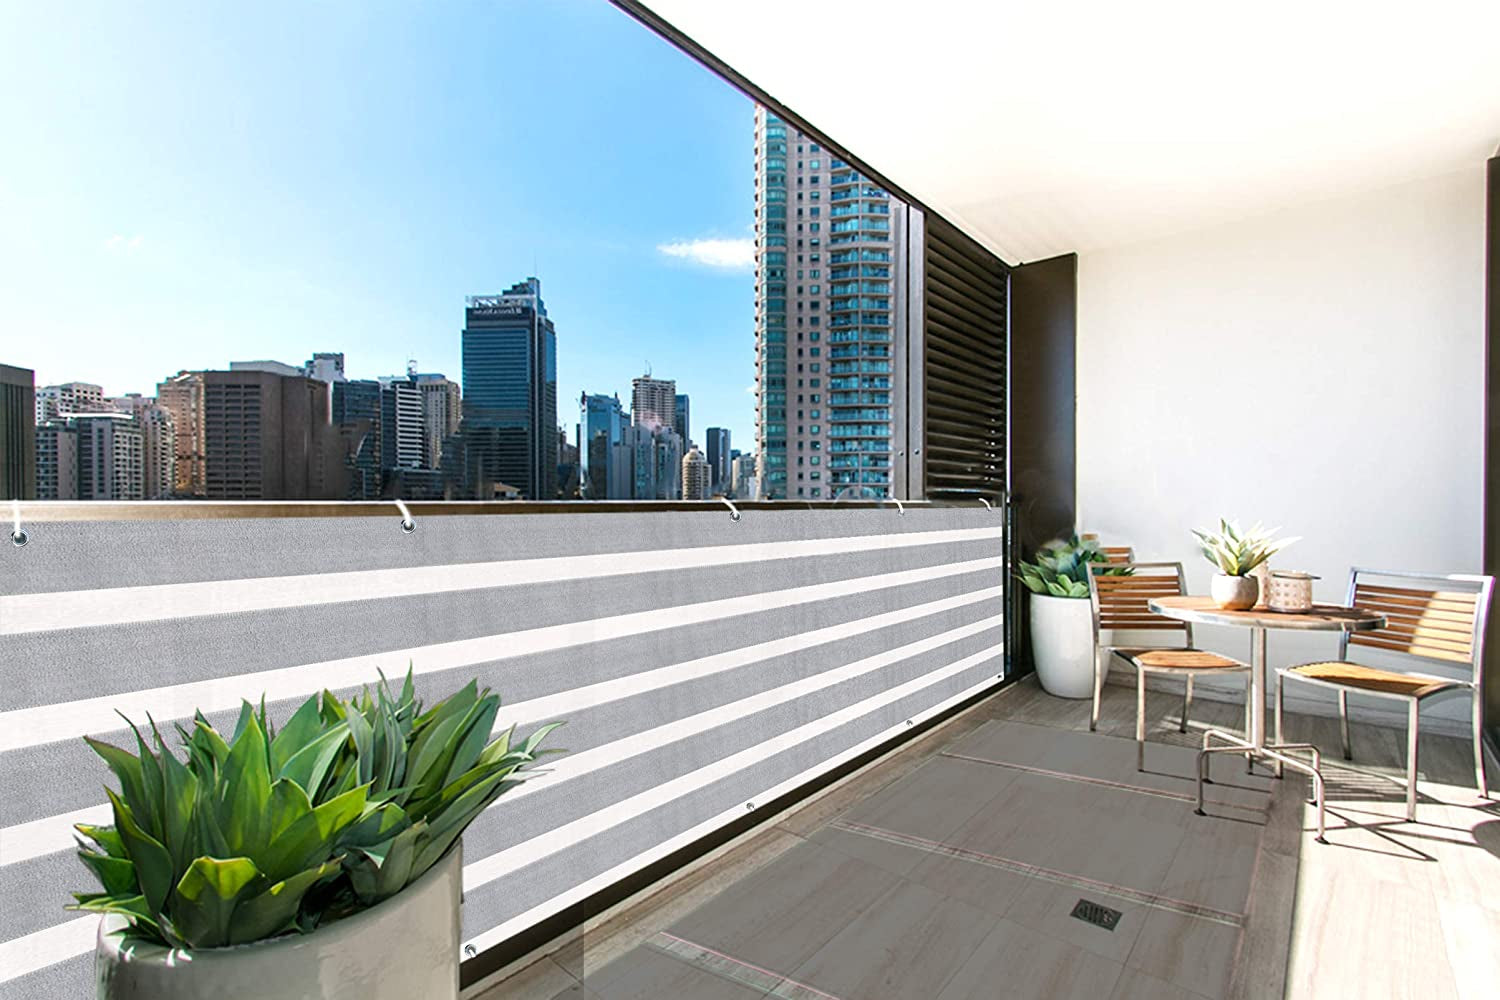 LOVE STORY, LOVE STORY Balcony Privacy Screen, 3.3' X 16.5' Deck Shield Screen Fence Cover,Uv Protection and Weather-Resistant,3 FT Height for Deck, Patio, Backyard, Outdoor Pool, Porch, Railing(Ivory Grey)